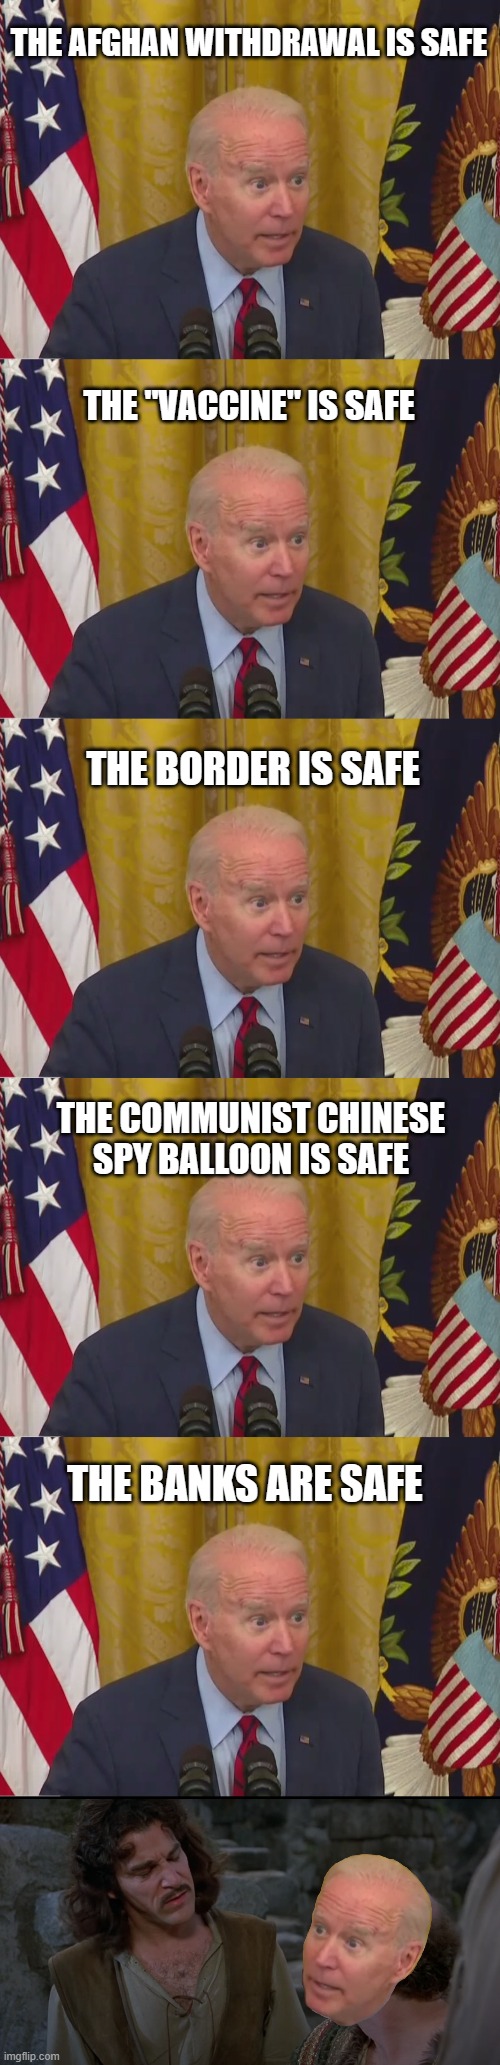 THE AFGHAN WITHDRAWAL IS SAFE; THE "VACCINE" IS SAFE; THE BORDER IS SAFE; THE COMMUNIST CHINESE
SPY BALLOON IS SAFE; THE BANKS ARE SAFE | image tagged in joe biden poopy pants | made w/ Imgflip meme maker